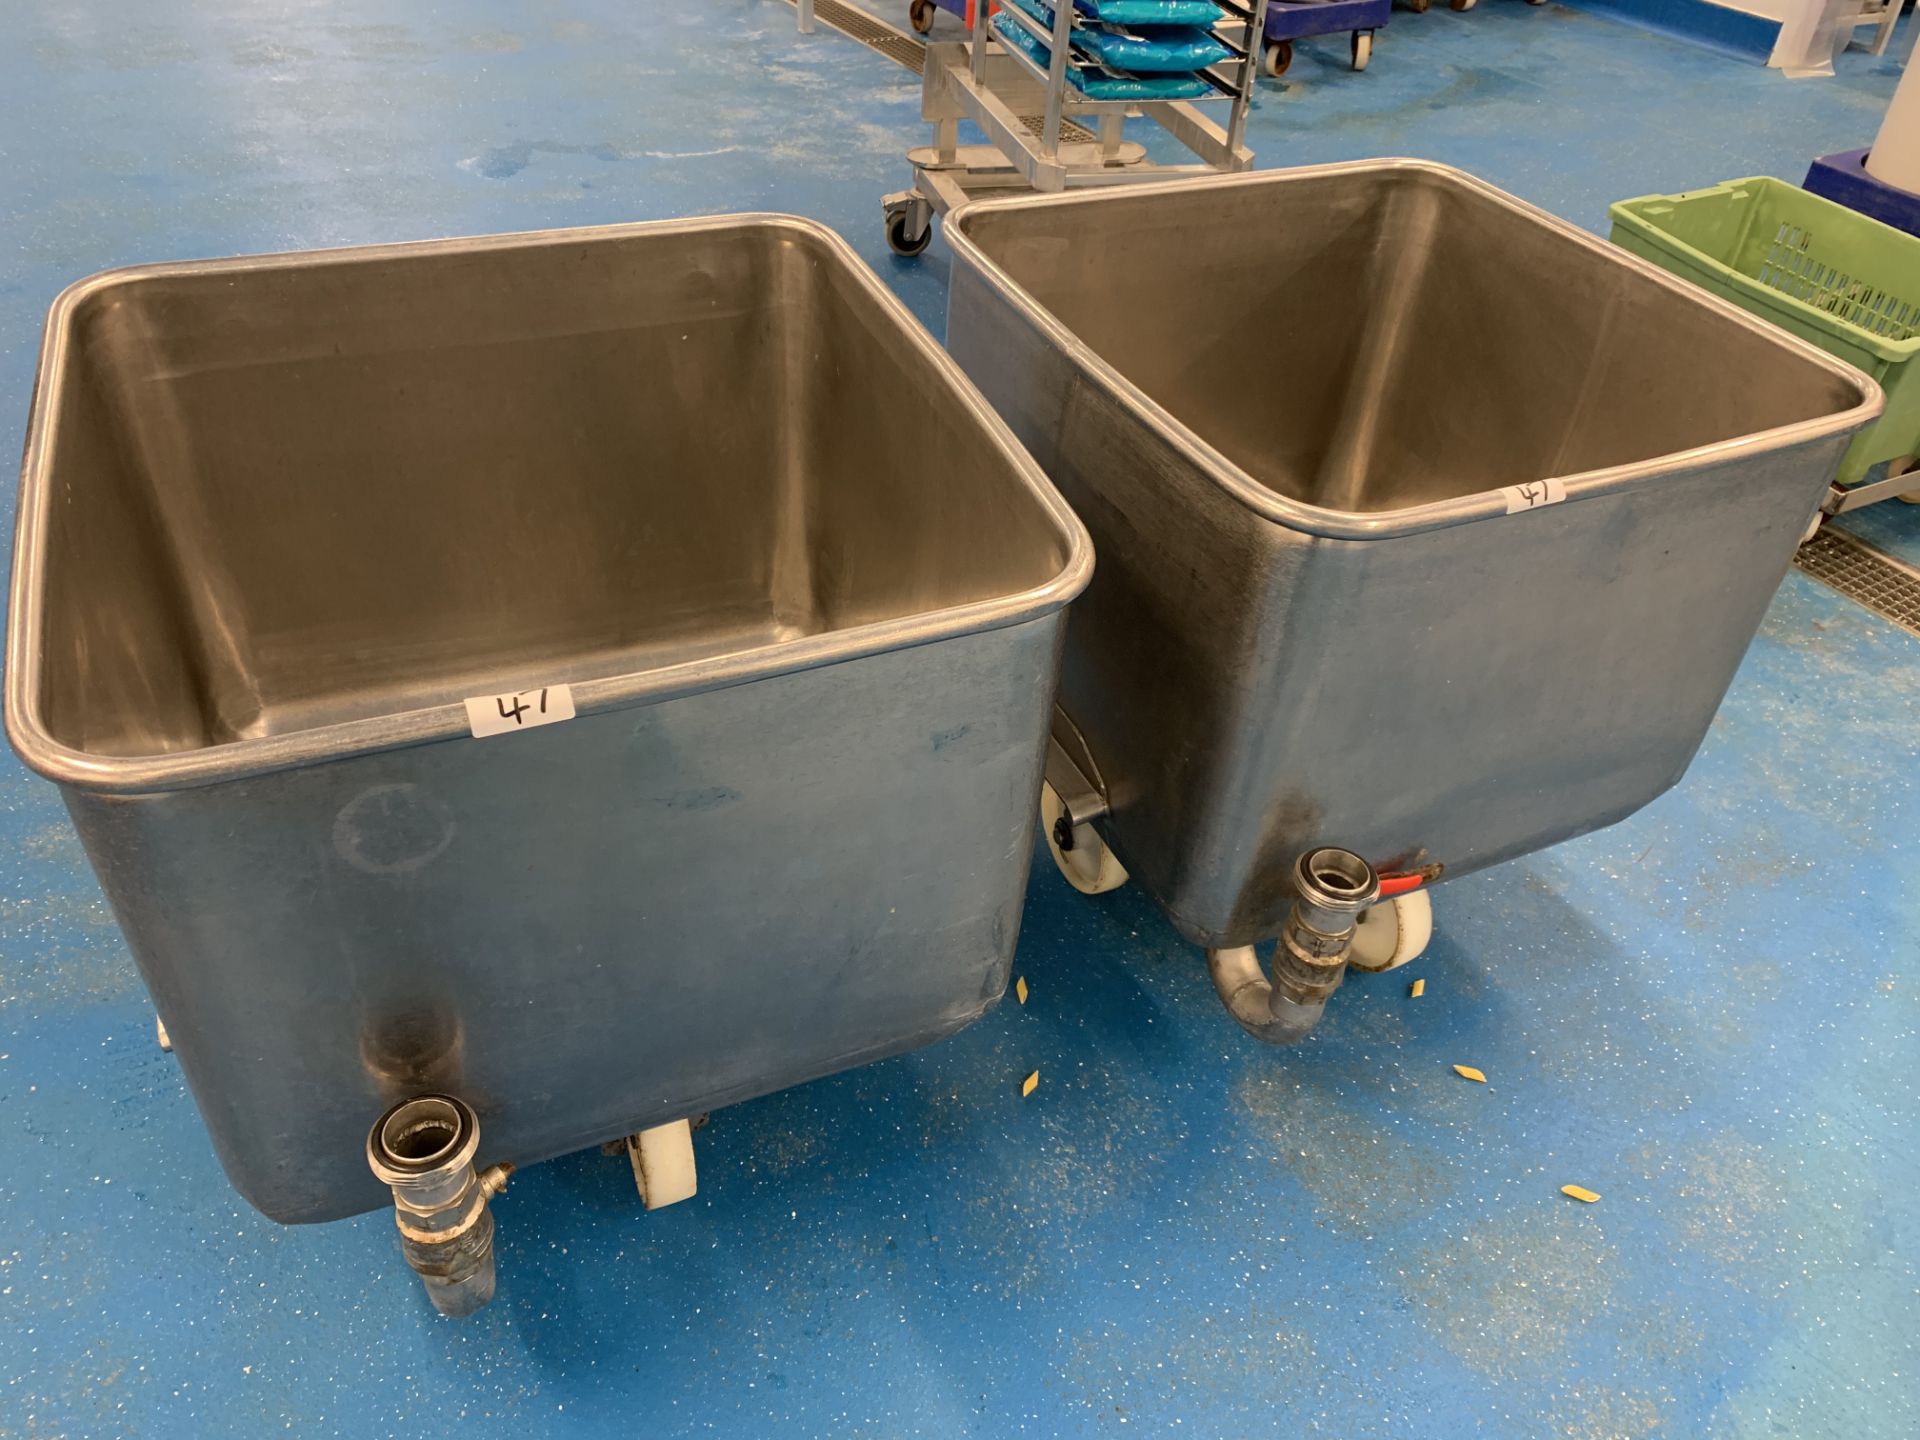 2 x Orbital stainless steel Tote Bins 670 x 670 x 50 mm fitted with drainer pipe